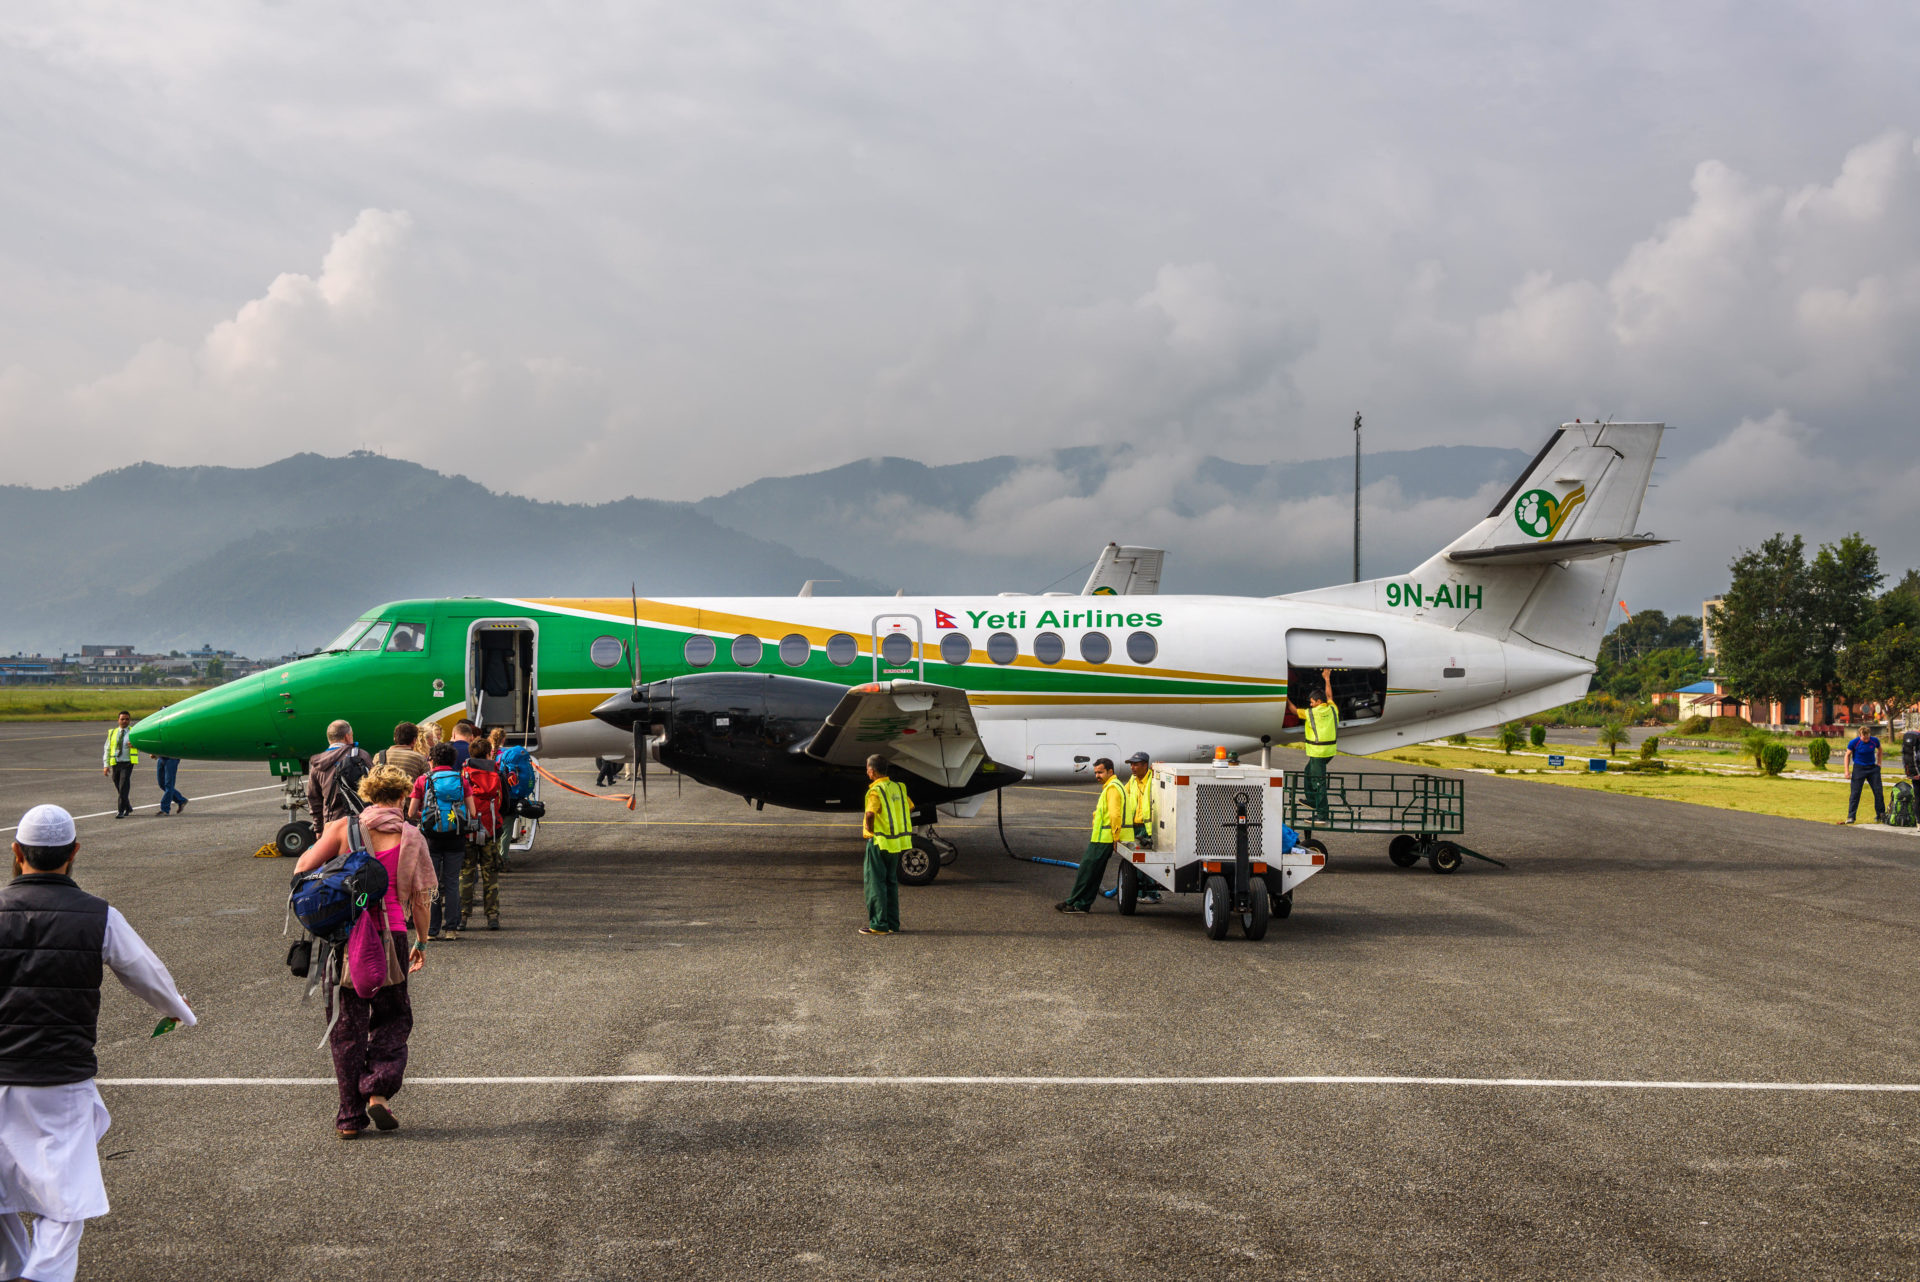 People board a Yeti Airlines plane flying from Pokhara to Kathmandu in Nepal in this October 2015 file photo.